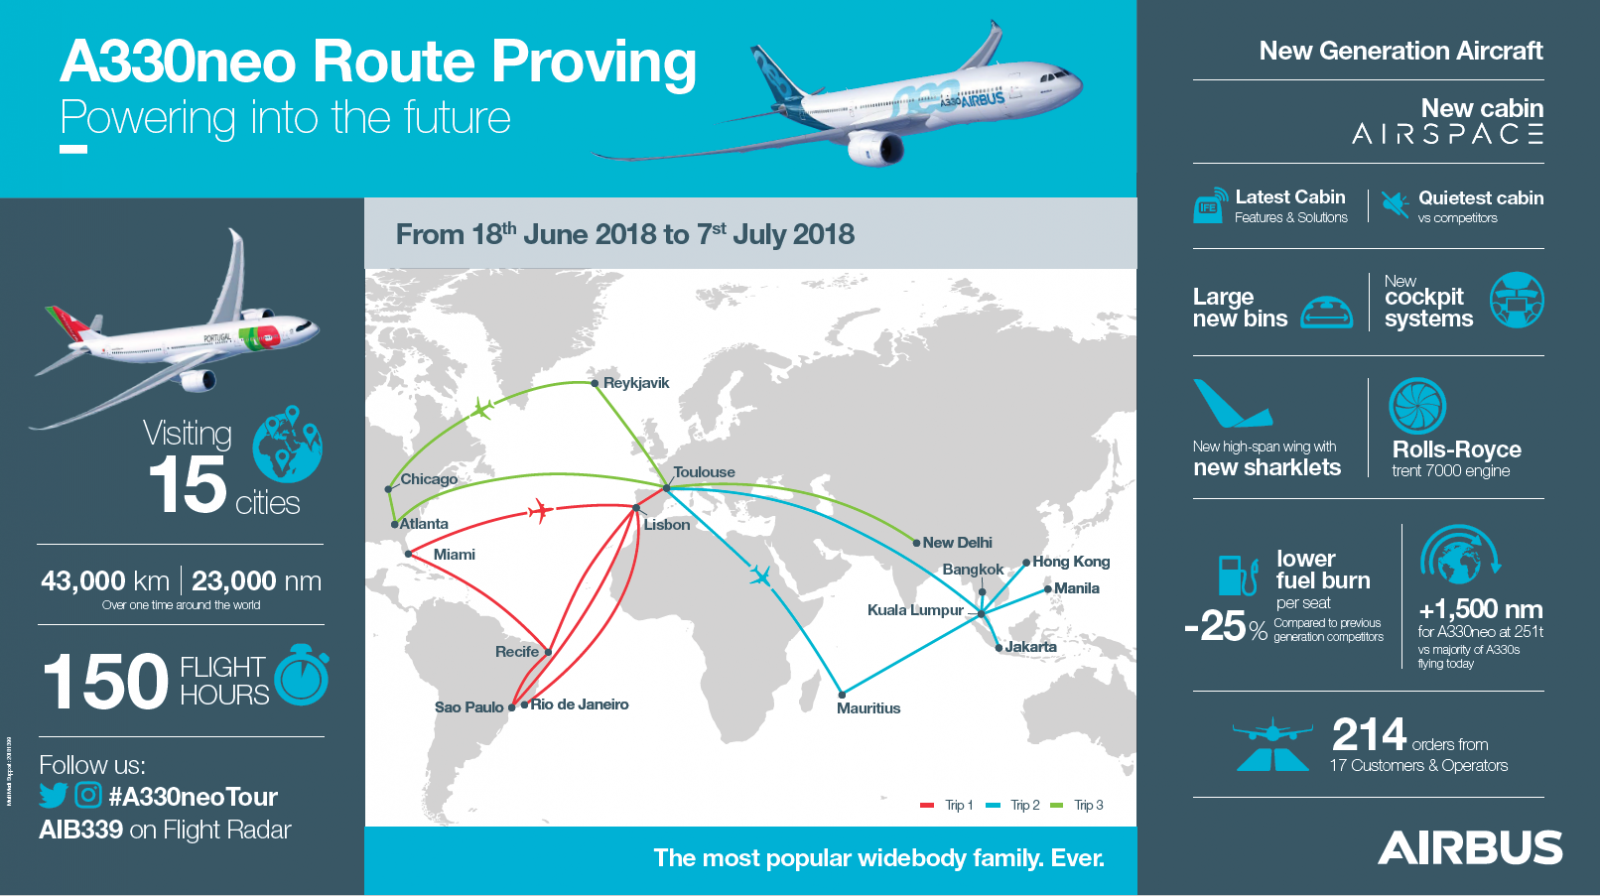 Airbus A330neo route proving